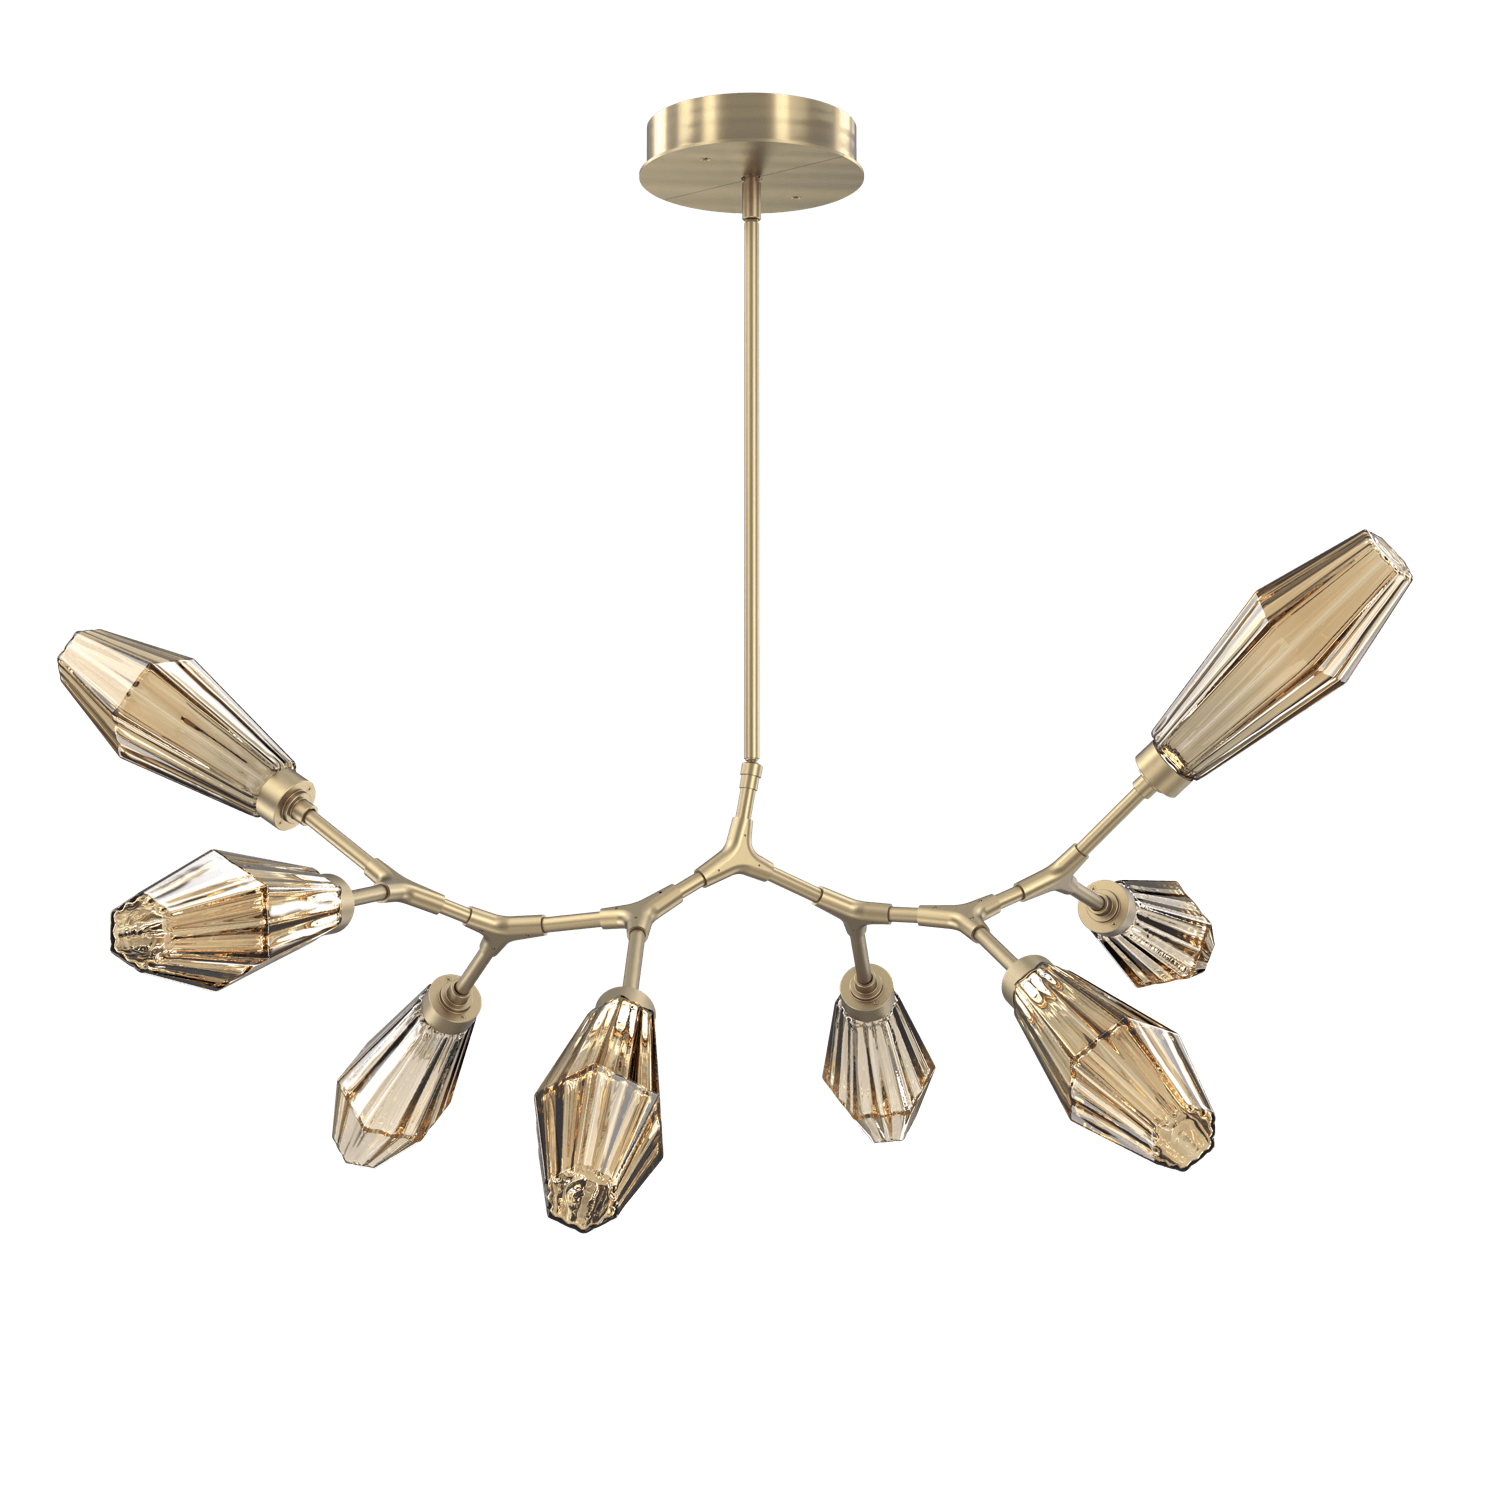 PLB0049-BB-HB-RB-Hammerton-Studio-Aalto-8-light-modern-branch-chandelier-with-heritage-brass-finish-and-optic-ribbed-bronze-glass-shades-and-LED-lamping